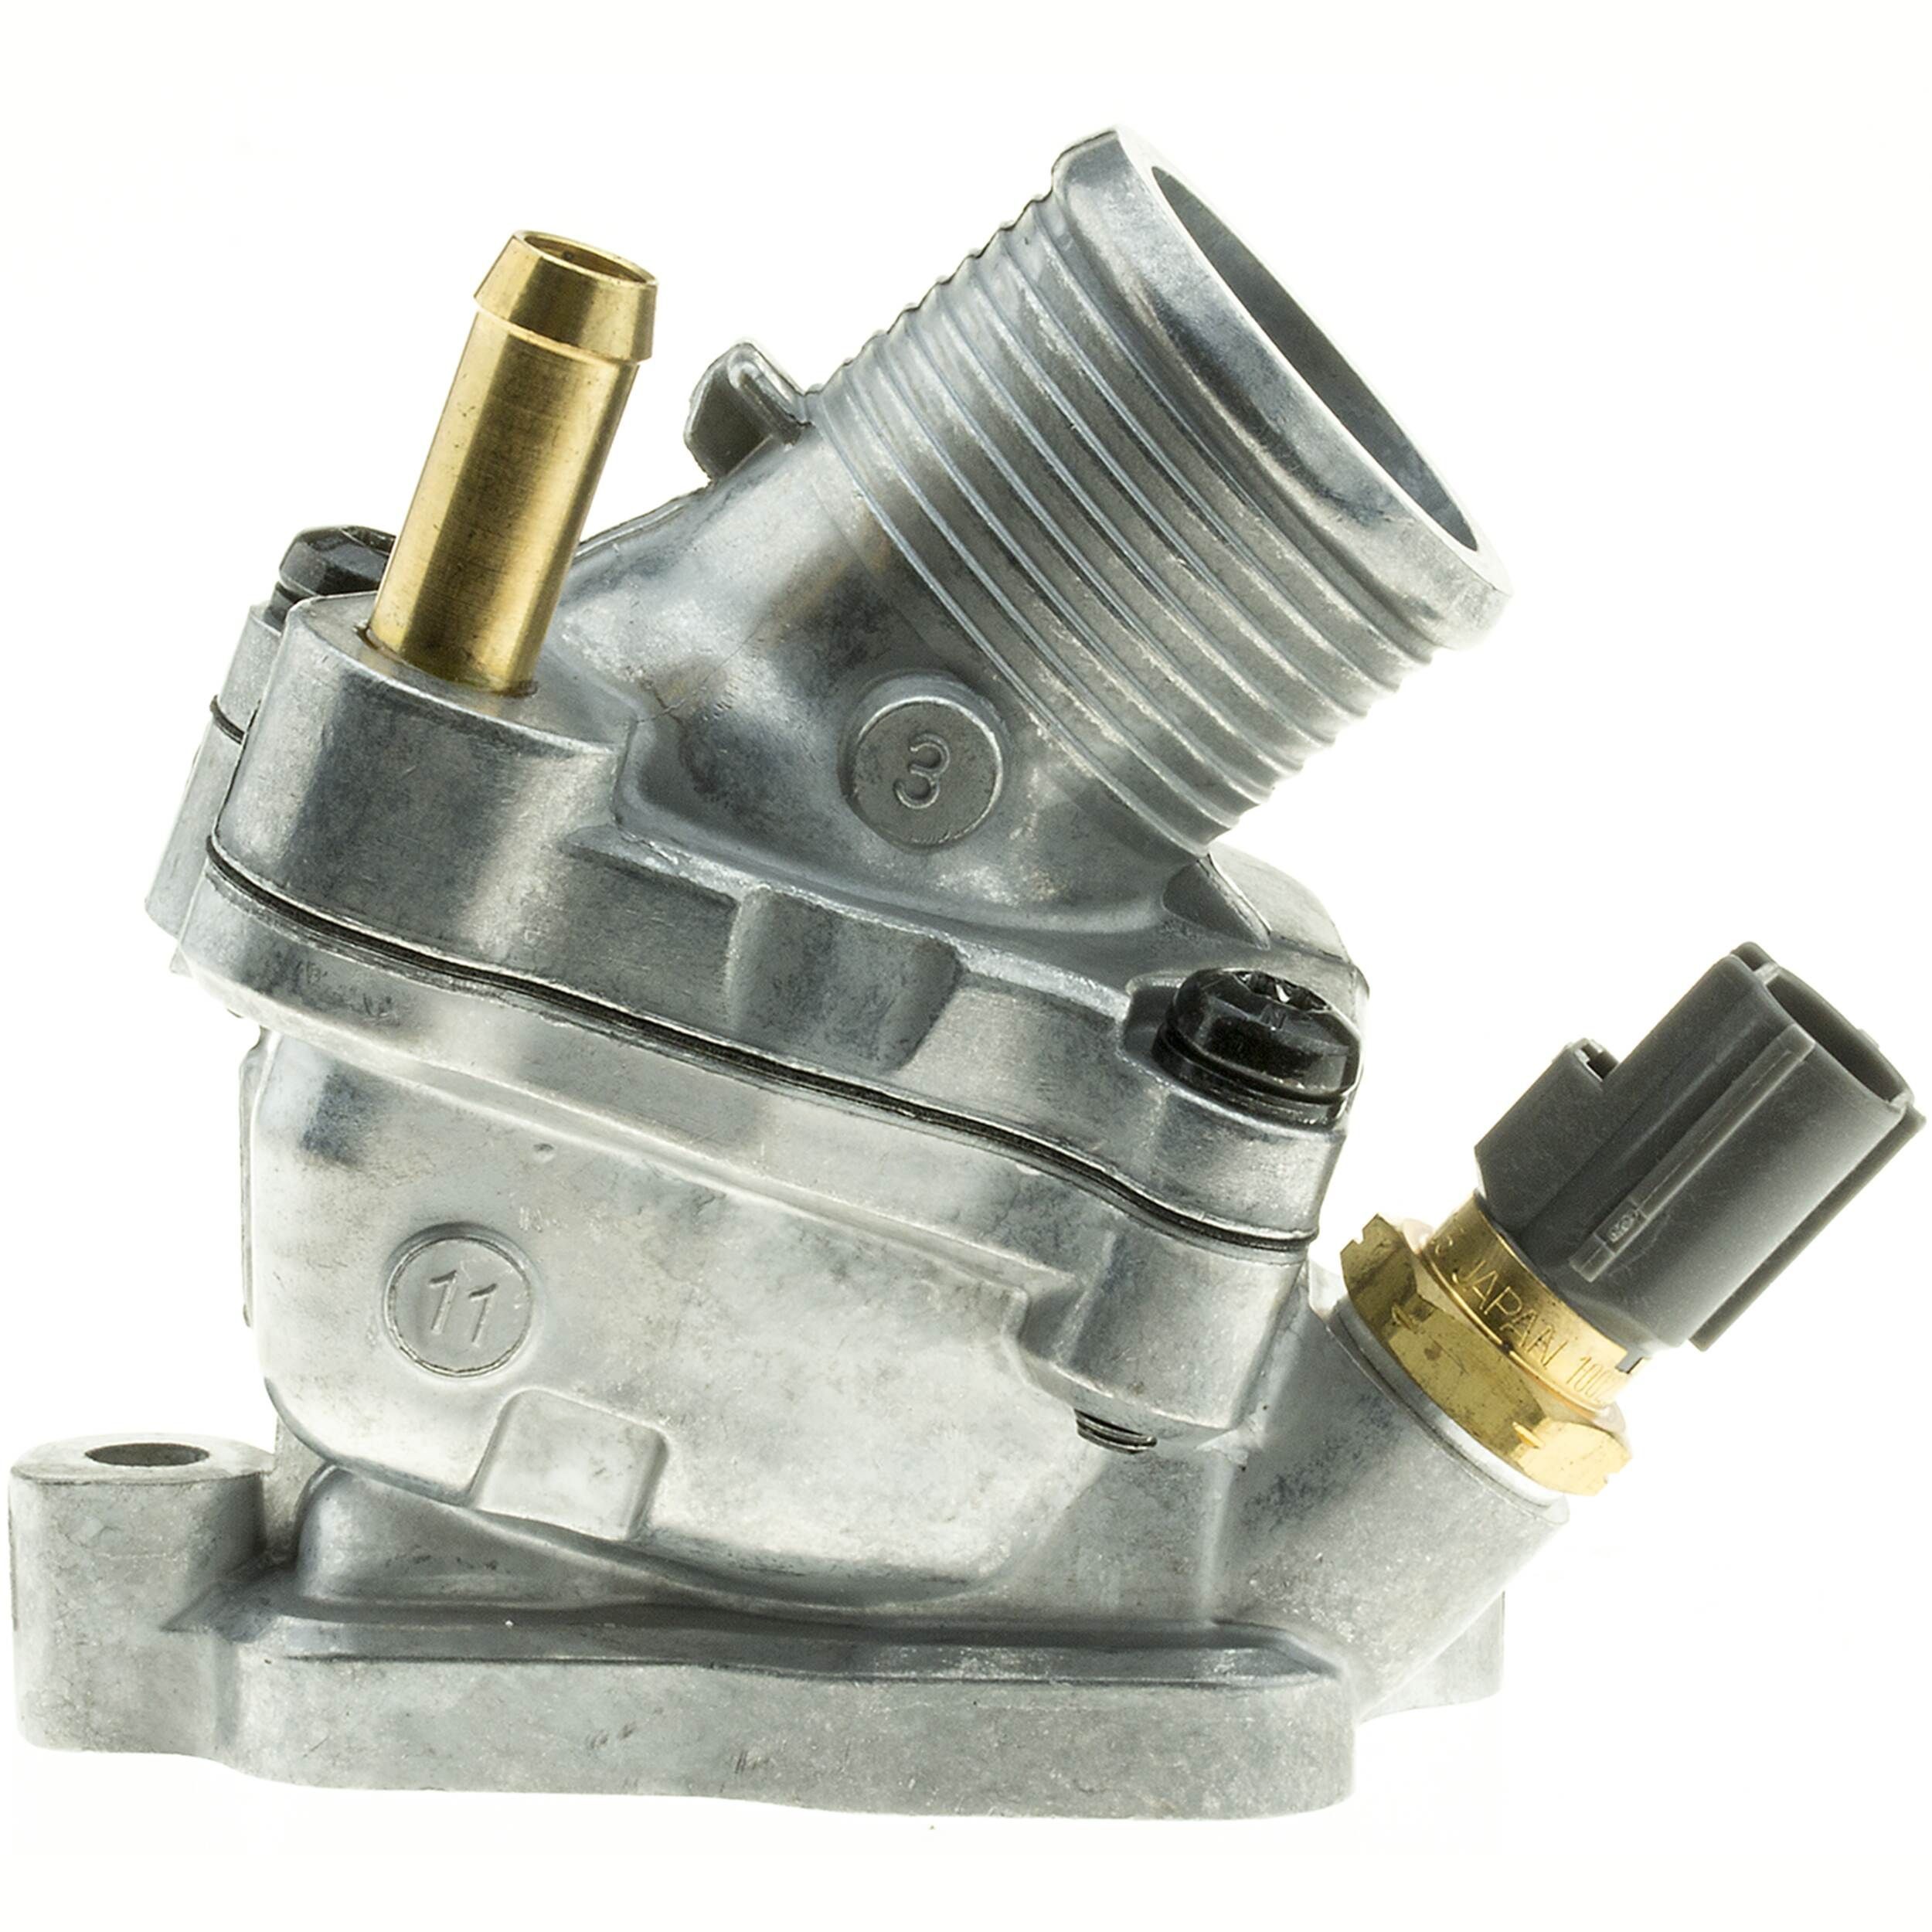 MOTORAD 909-90K Engine thermostat Opening Temperature: 90°C, with gaskets/seals, with housing